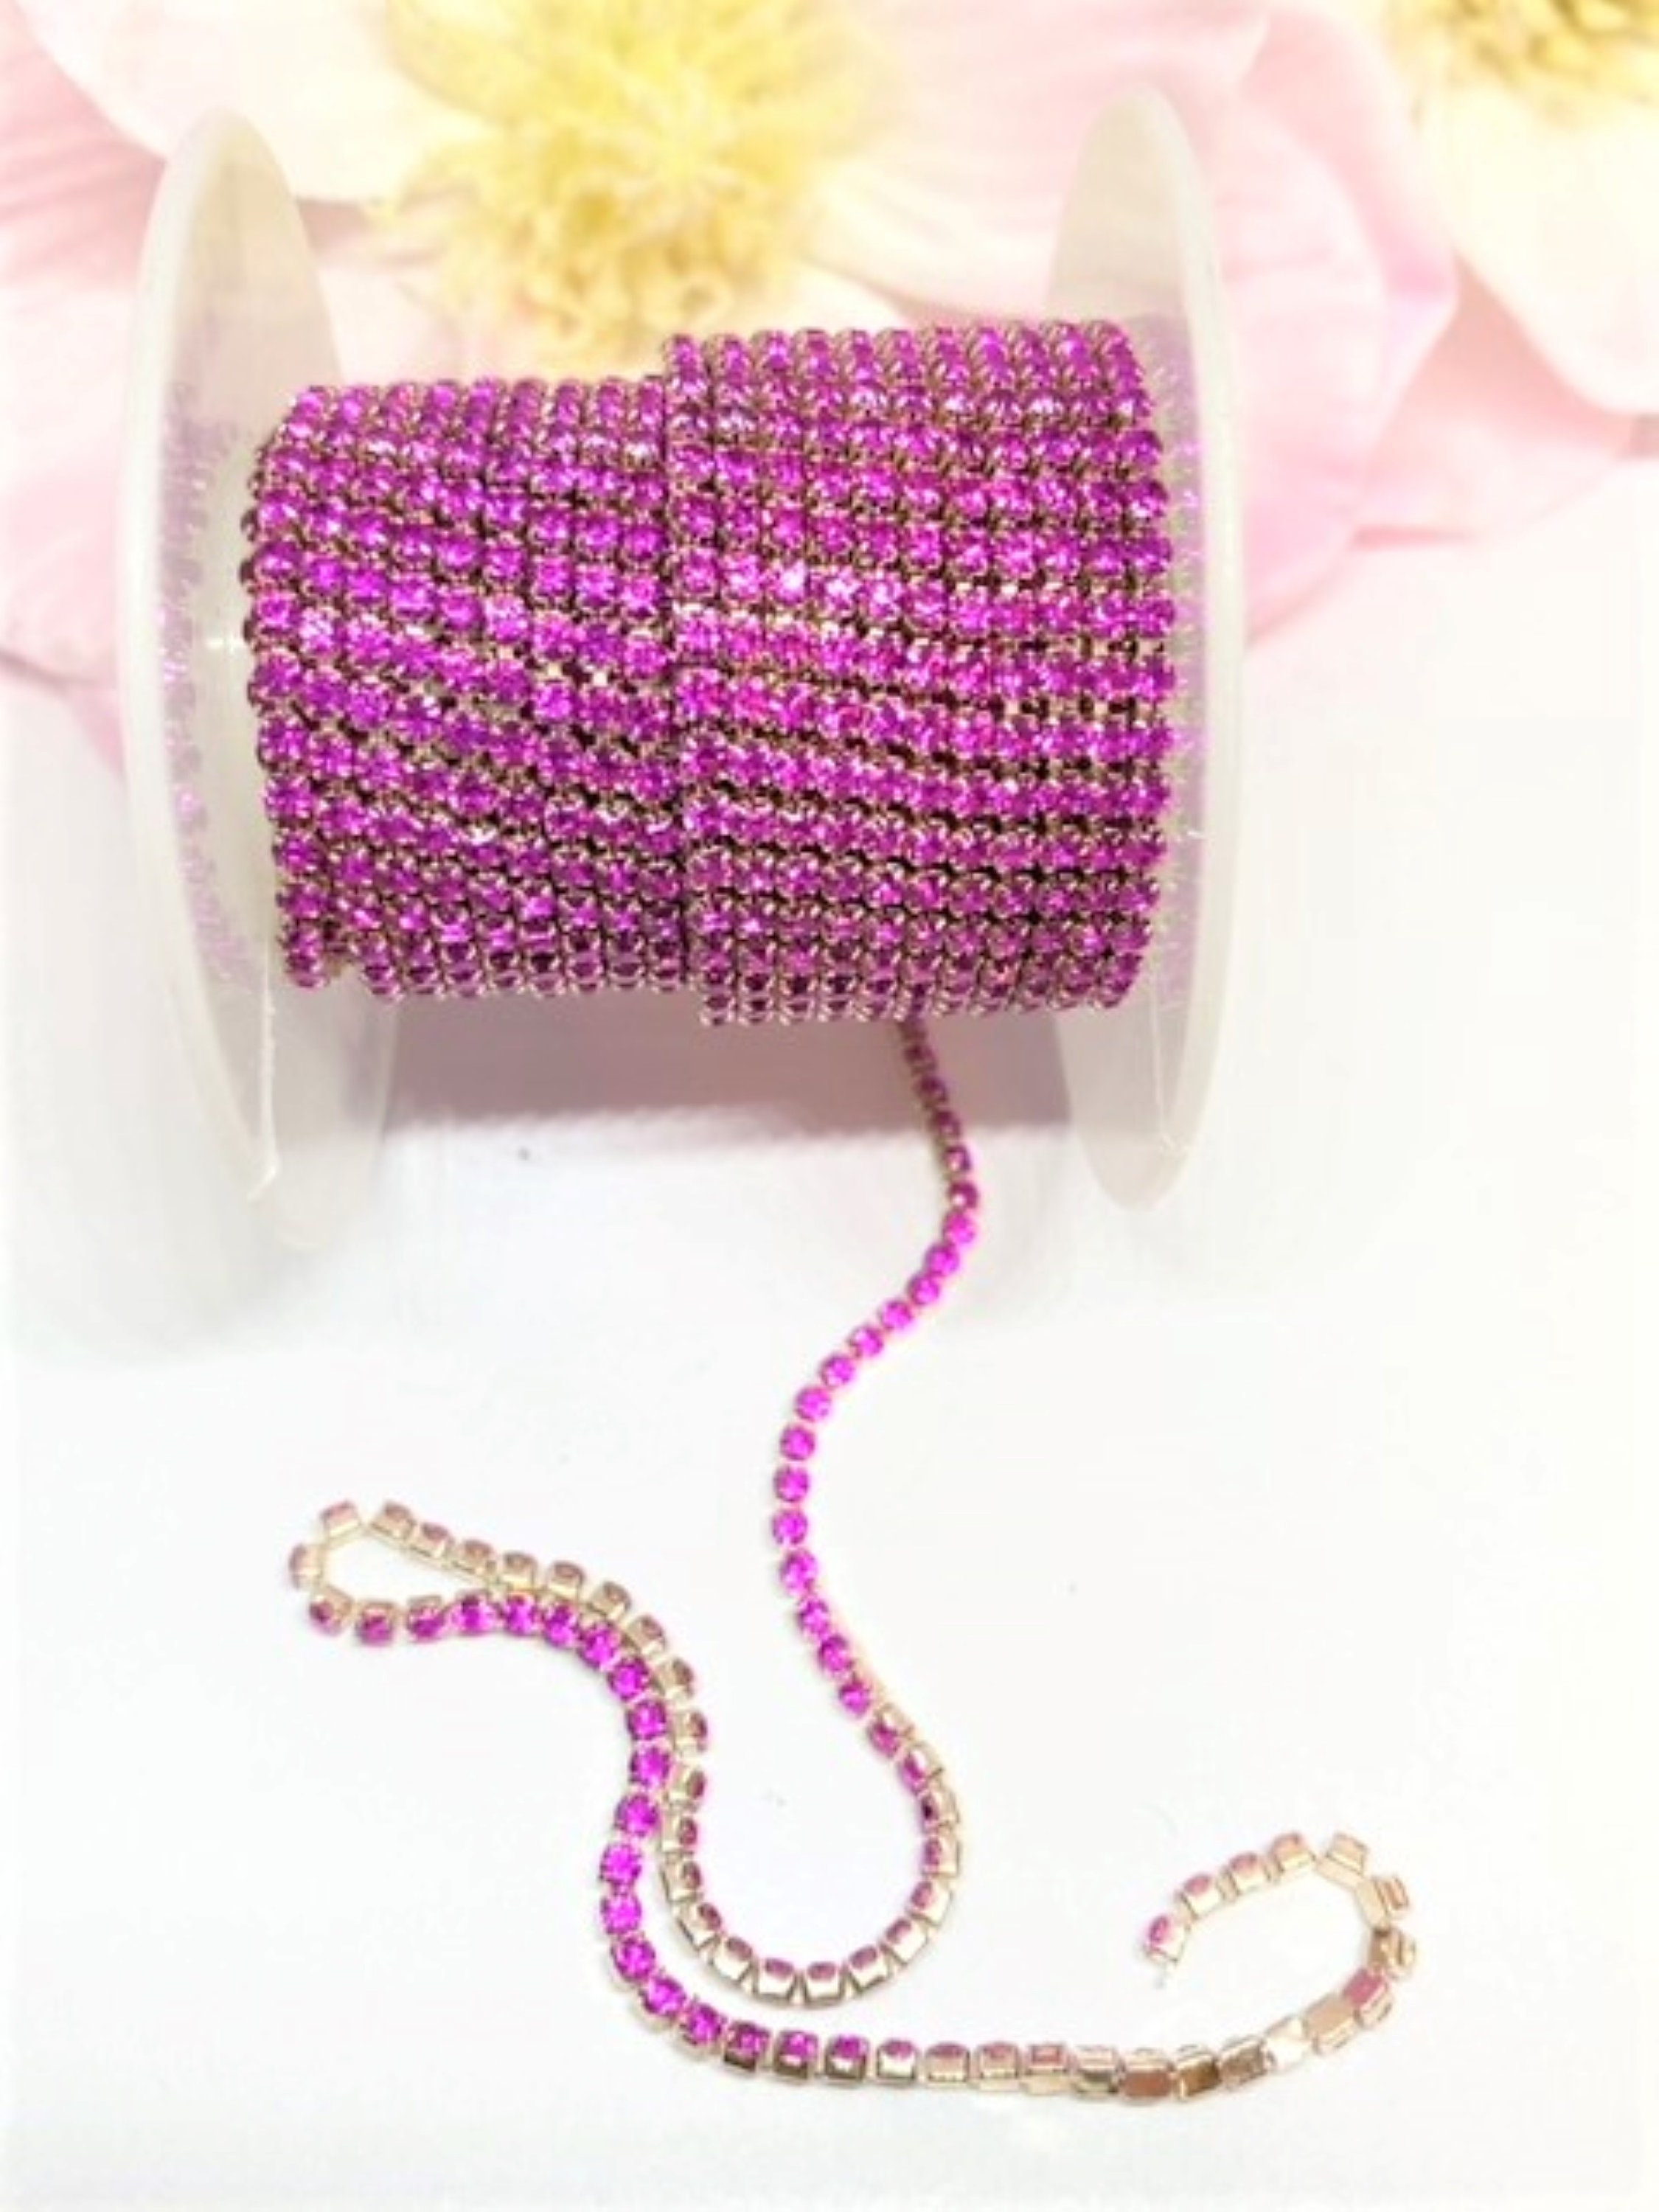 1 YARD 2mm Rhinestones Cup Chain Dark Purple Color With the Same Color  Setting SS6 Sold by the Yard. 